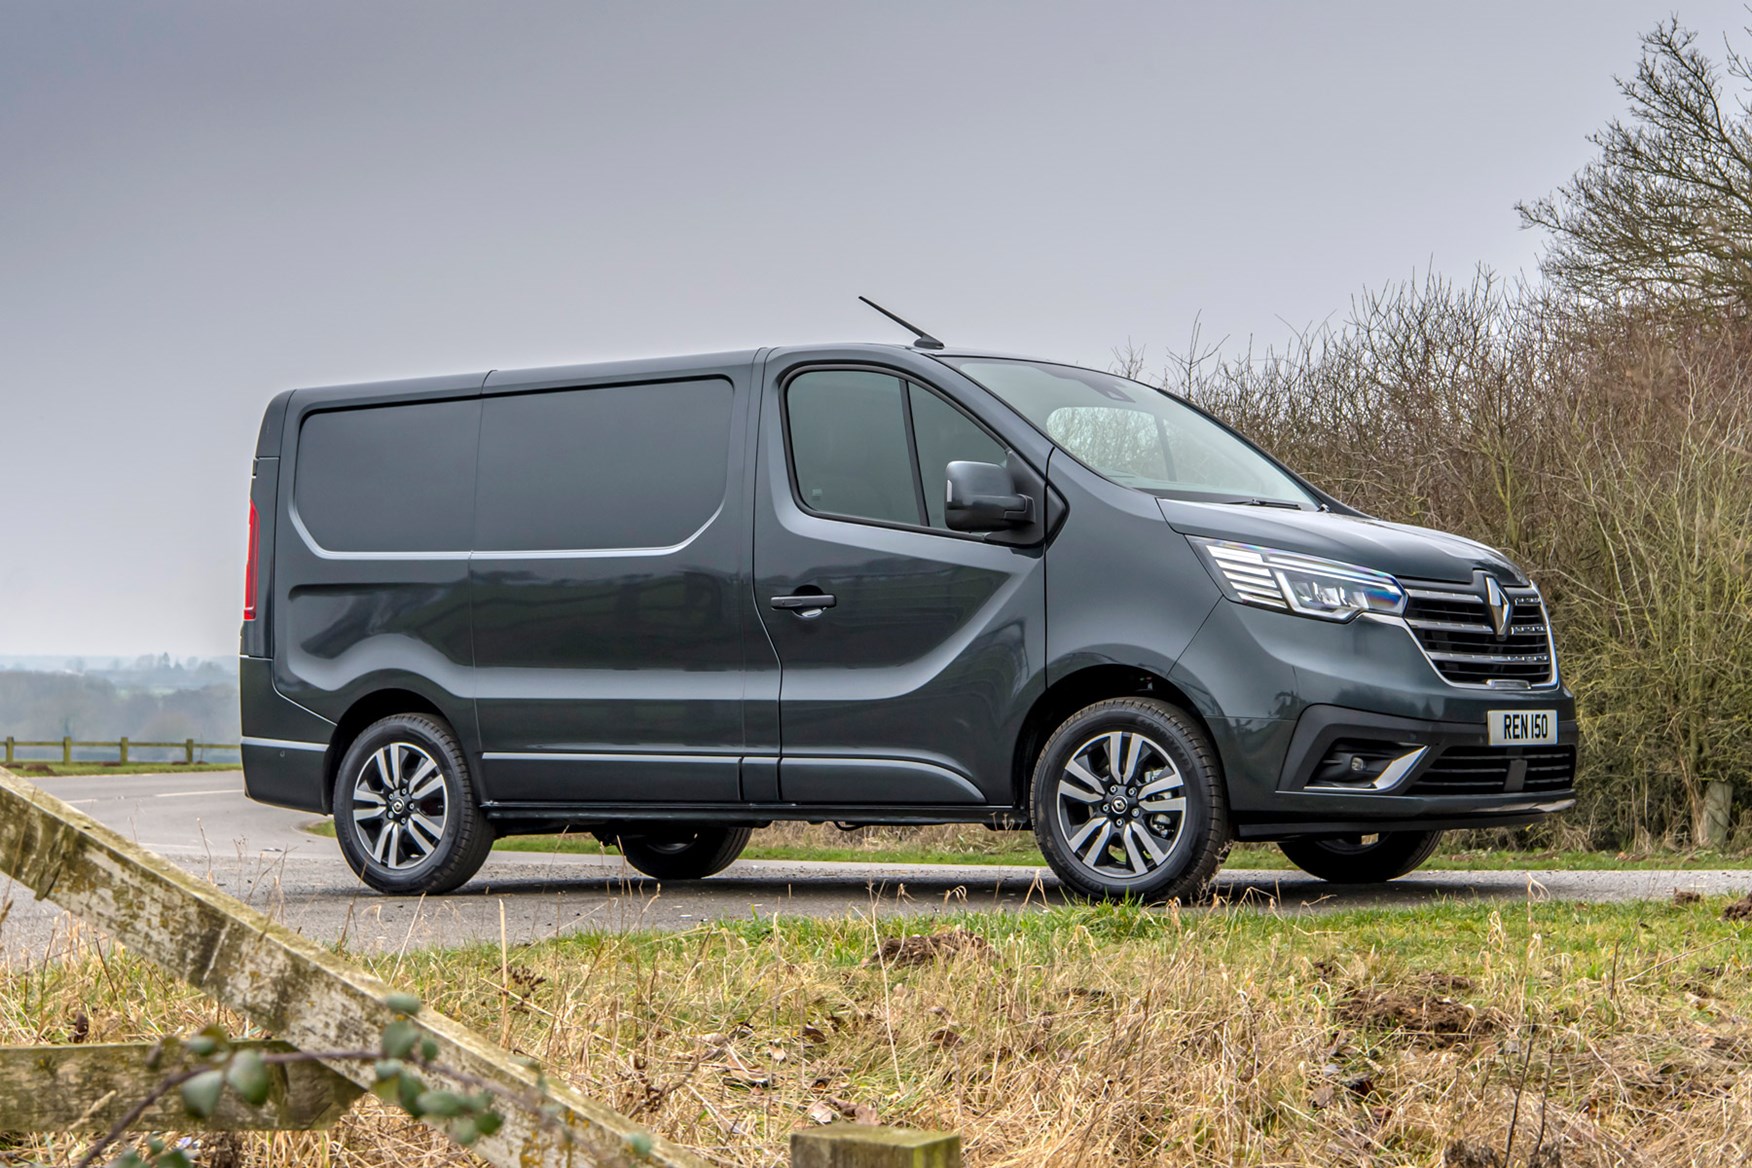 Renault Trafic van review - 2022 facelift model, front, countryside